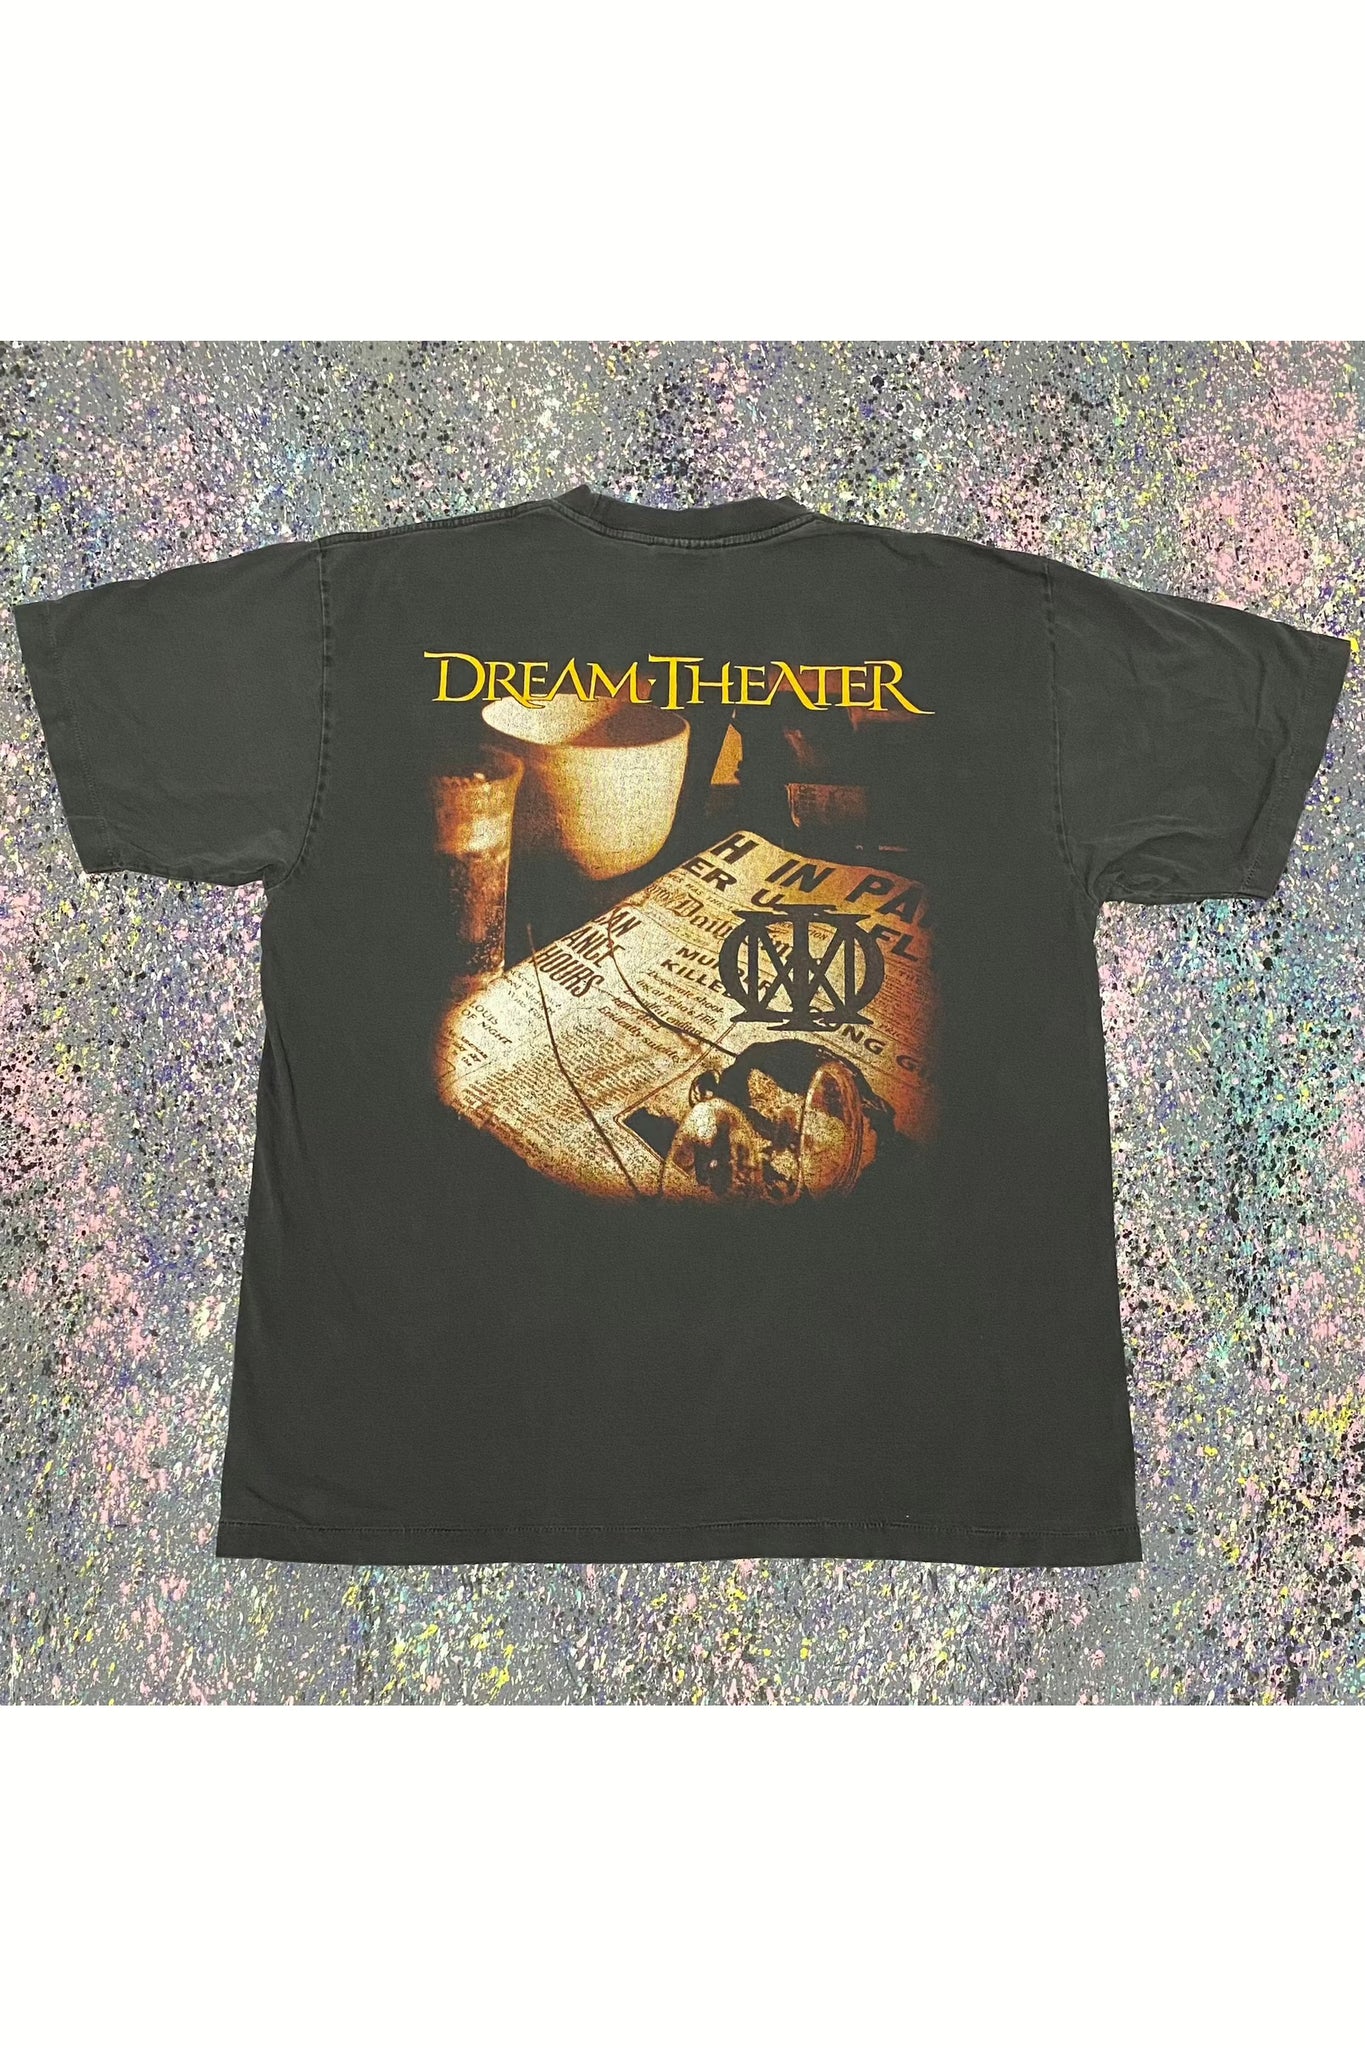 Vintage Single Stitch Dream Theater Metropolis Pt. 2: Scenes From A Memory Tee- XL